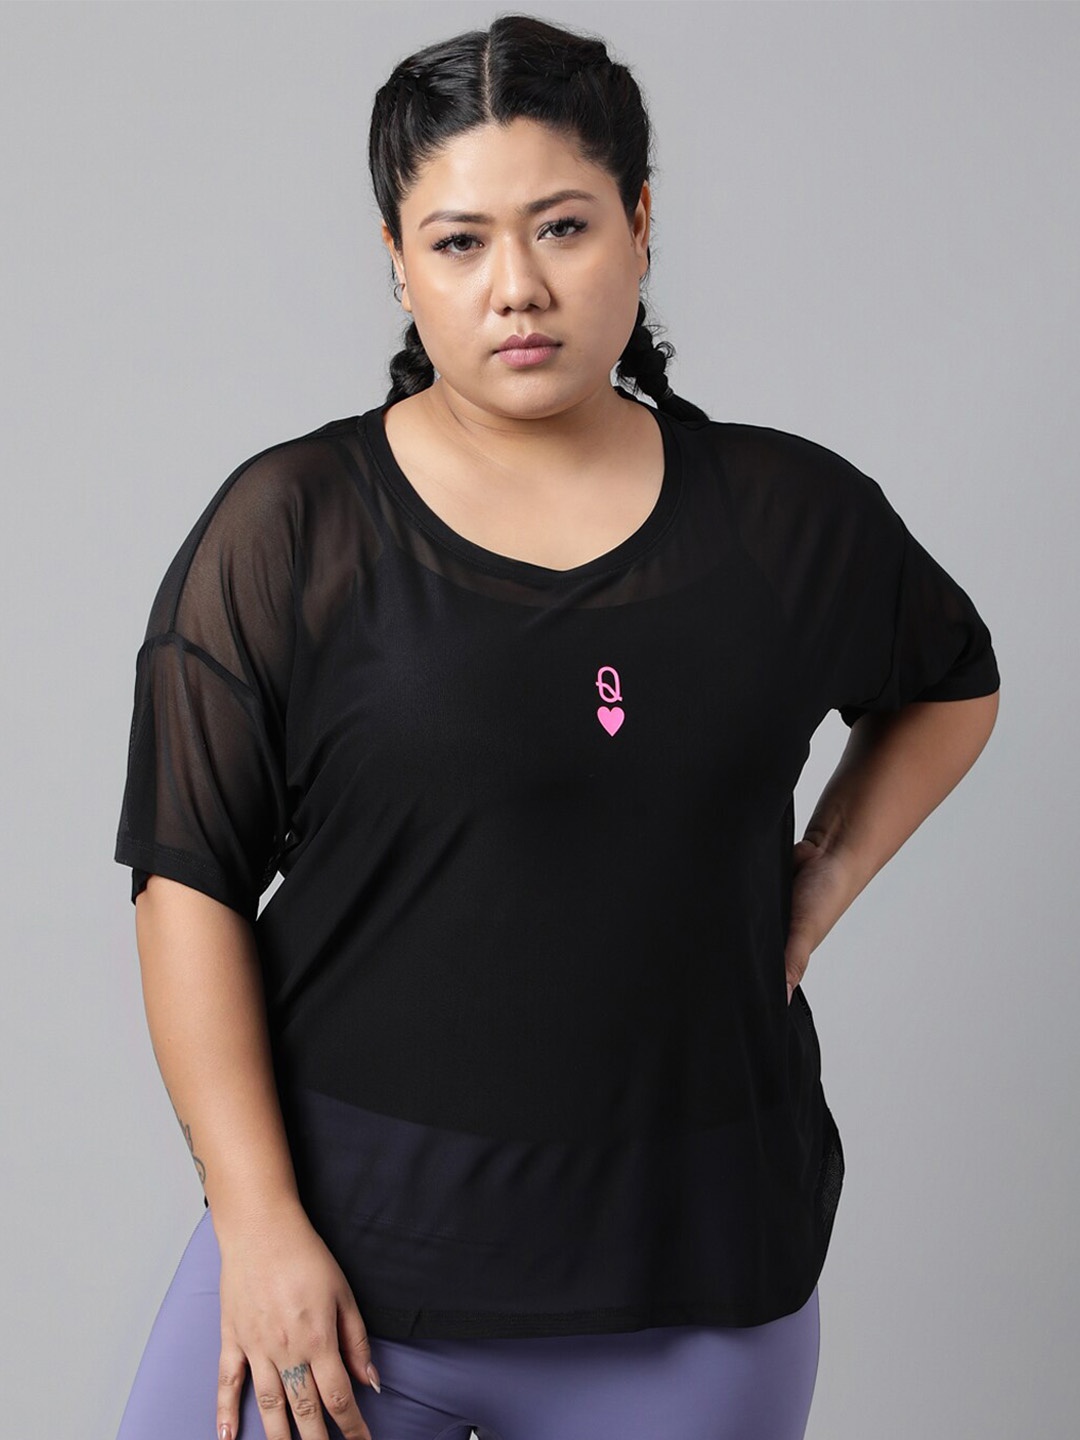 

MKH Plus Size Relaxed Fit Dri FIT T-shirt, Black